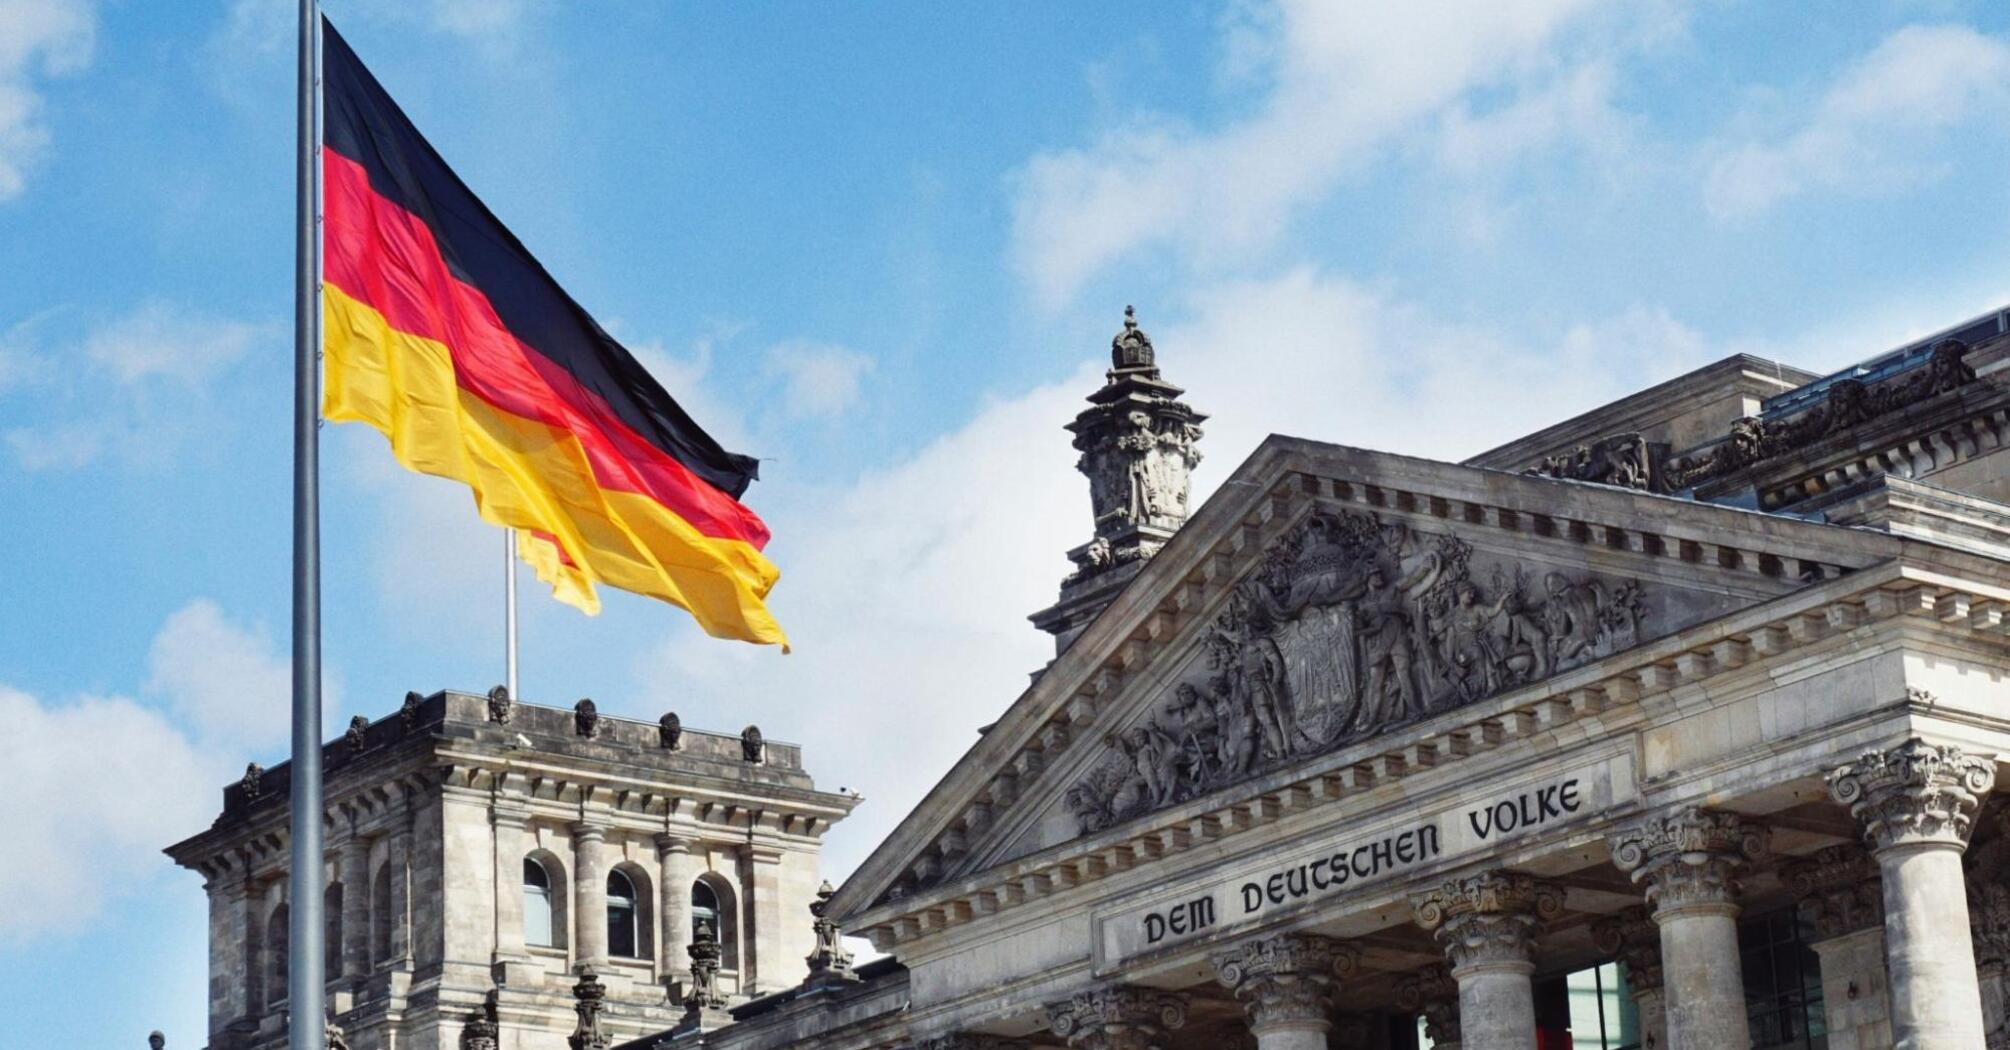 The German flag flies in front of the Reichstag building in Berlin